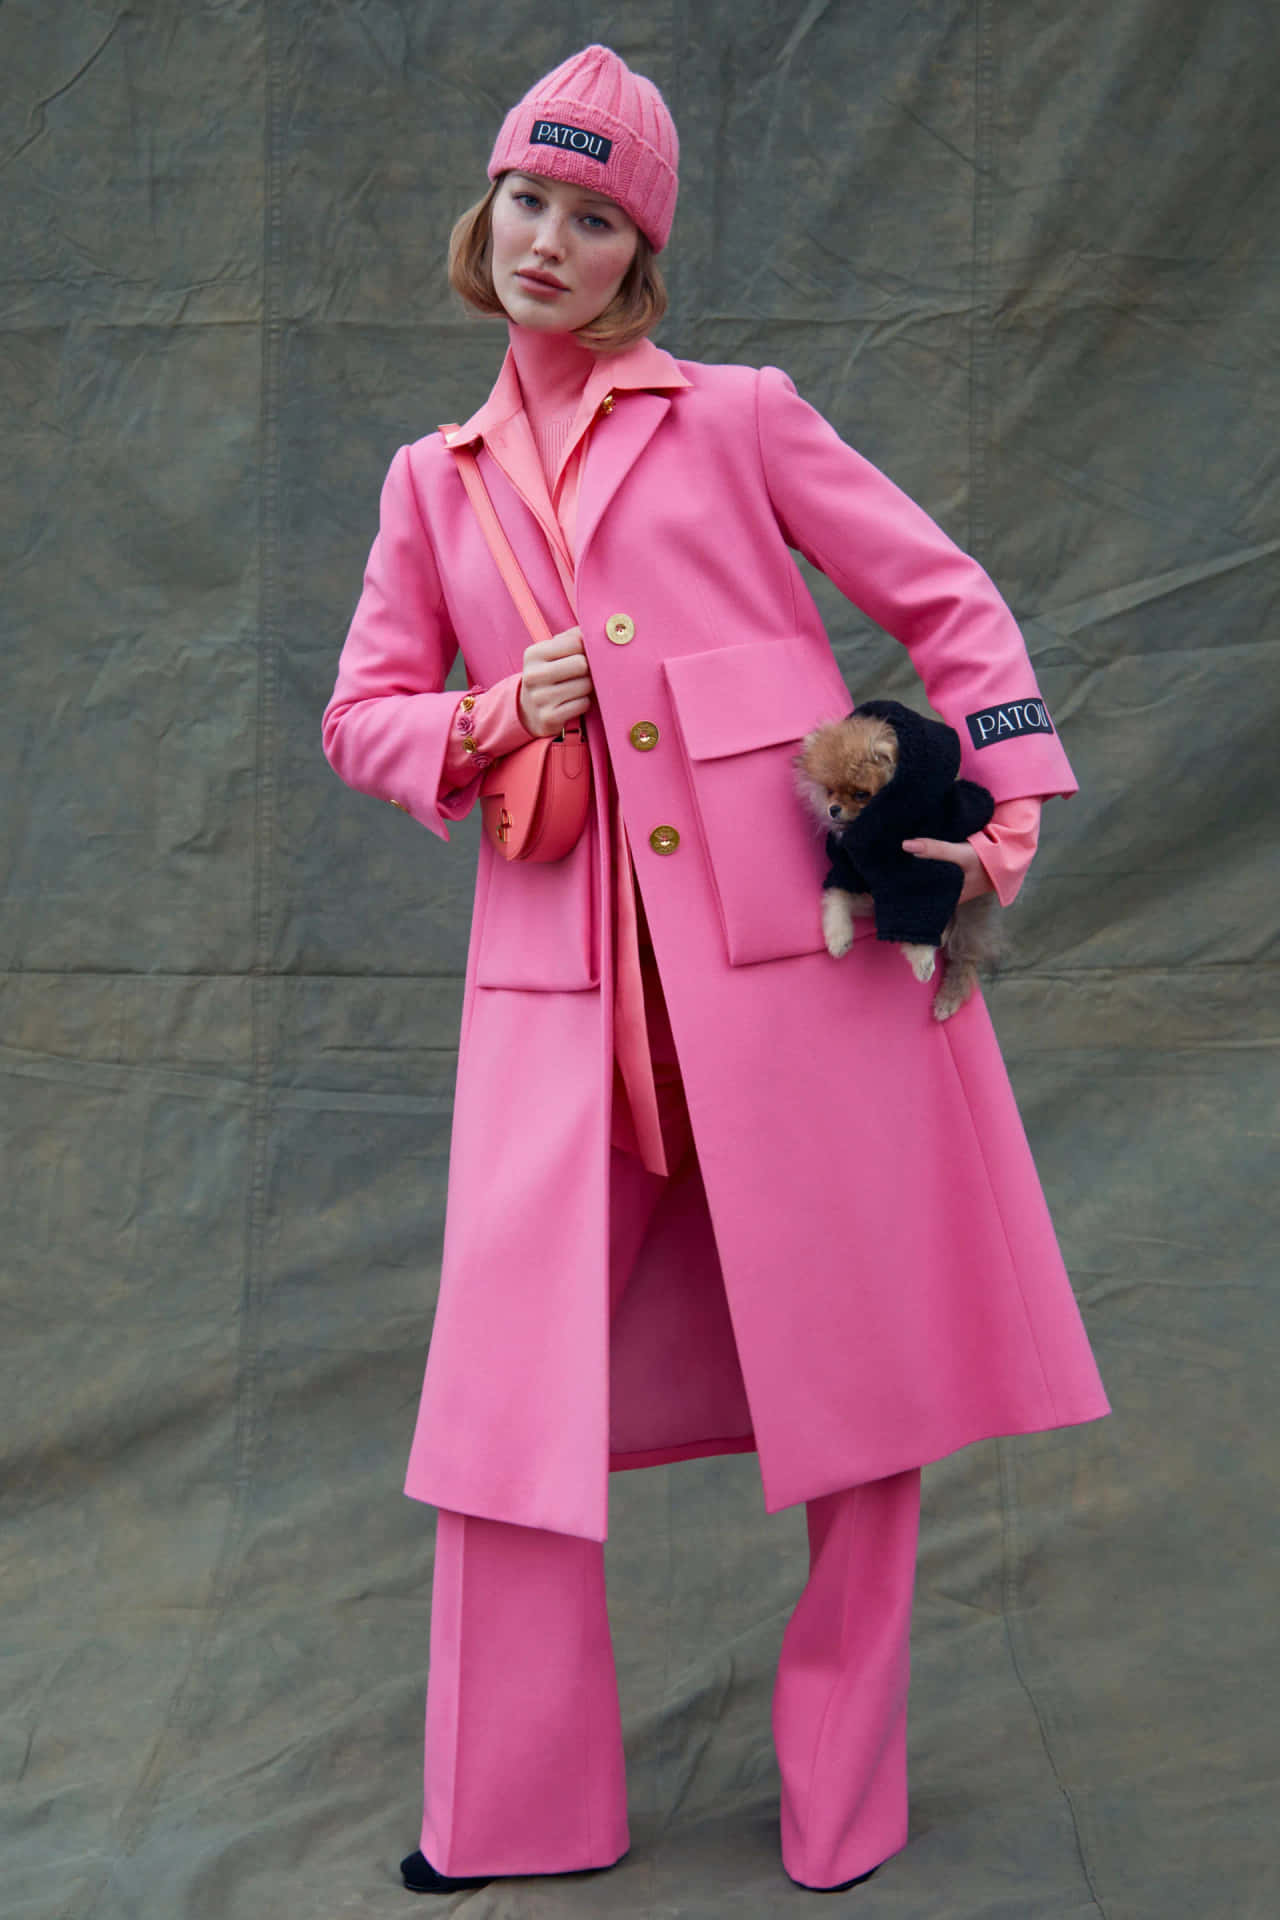 Patou Model In All-pink Outfit Wallpaper